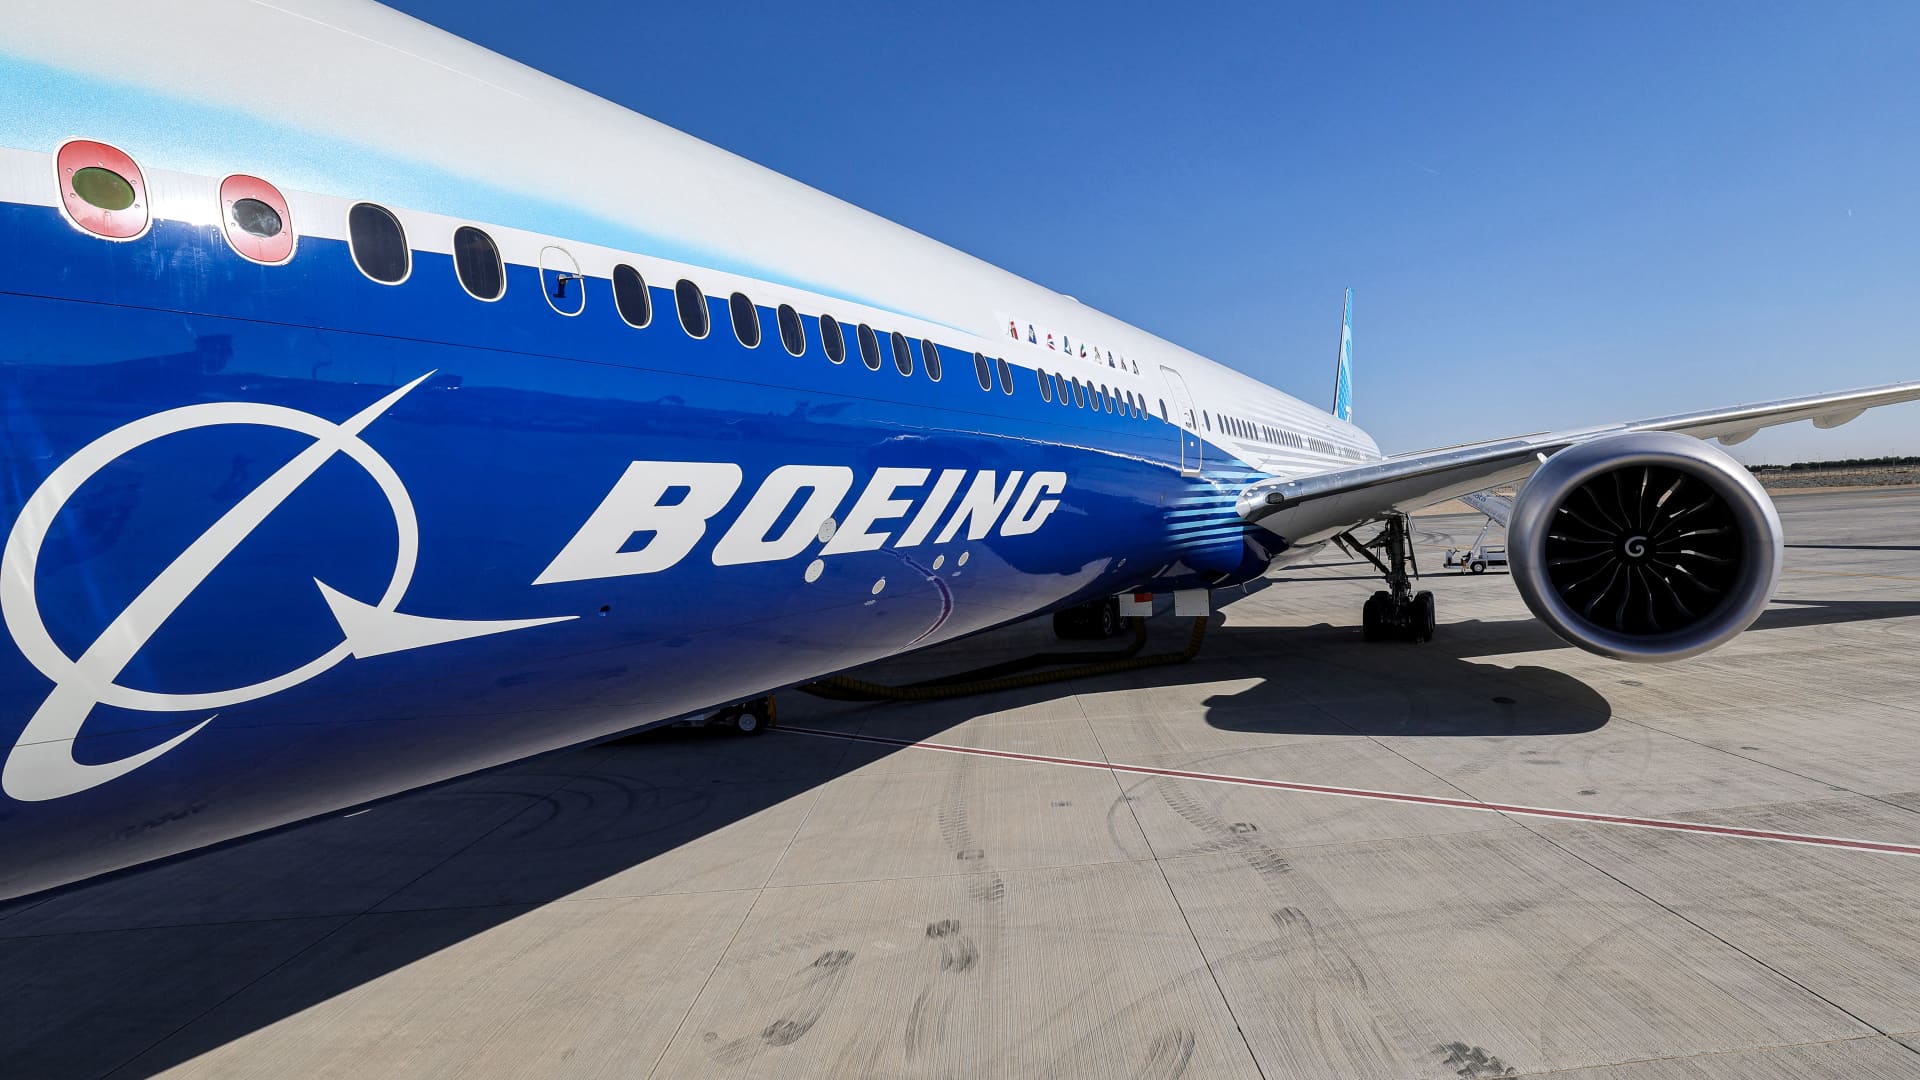 Stocks Making the Biggest Premarket Moves: Boeing, Affirm, Crocs, Carlyle Group and More